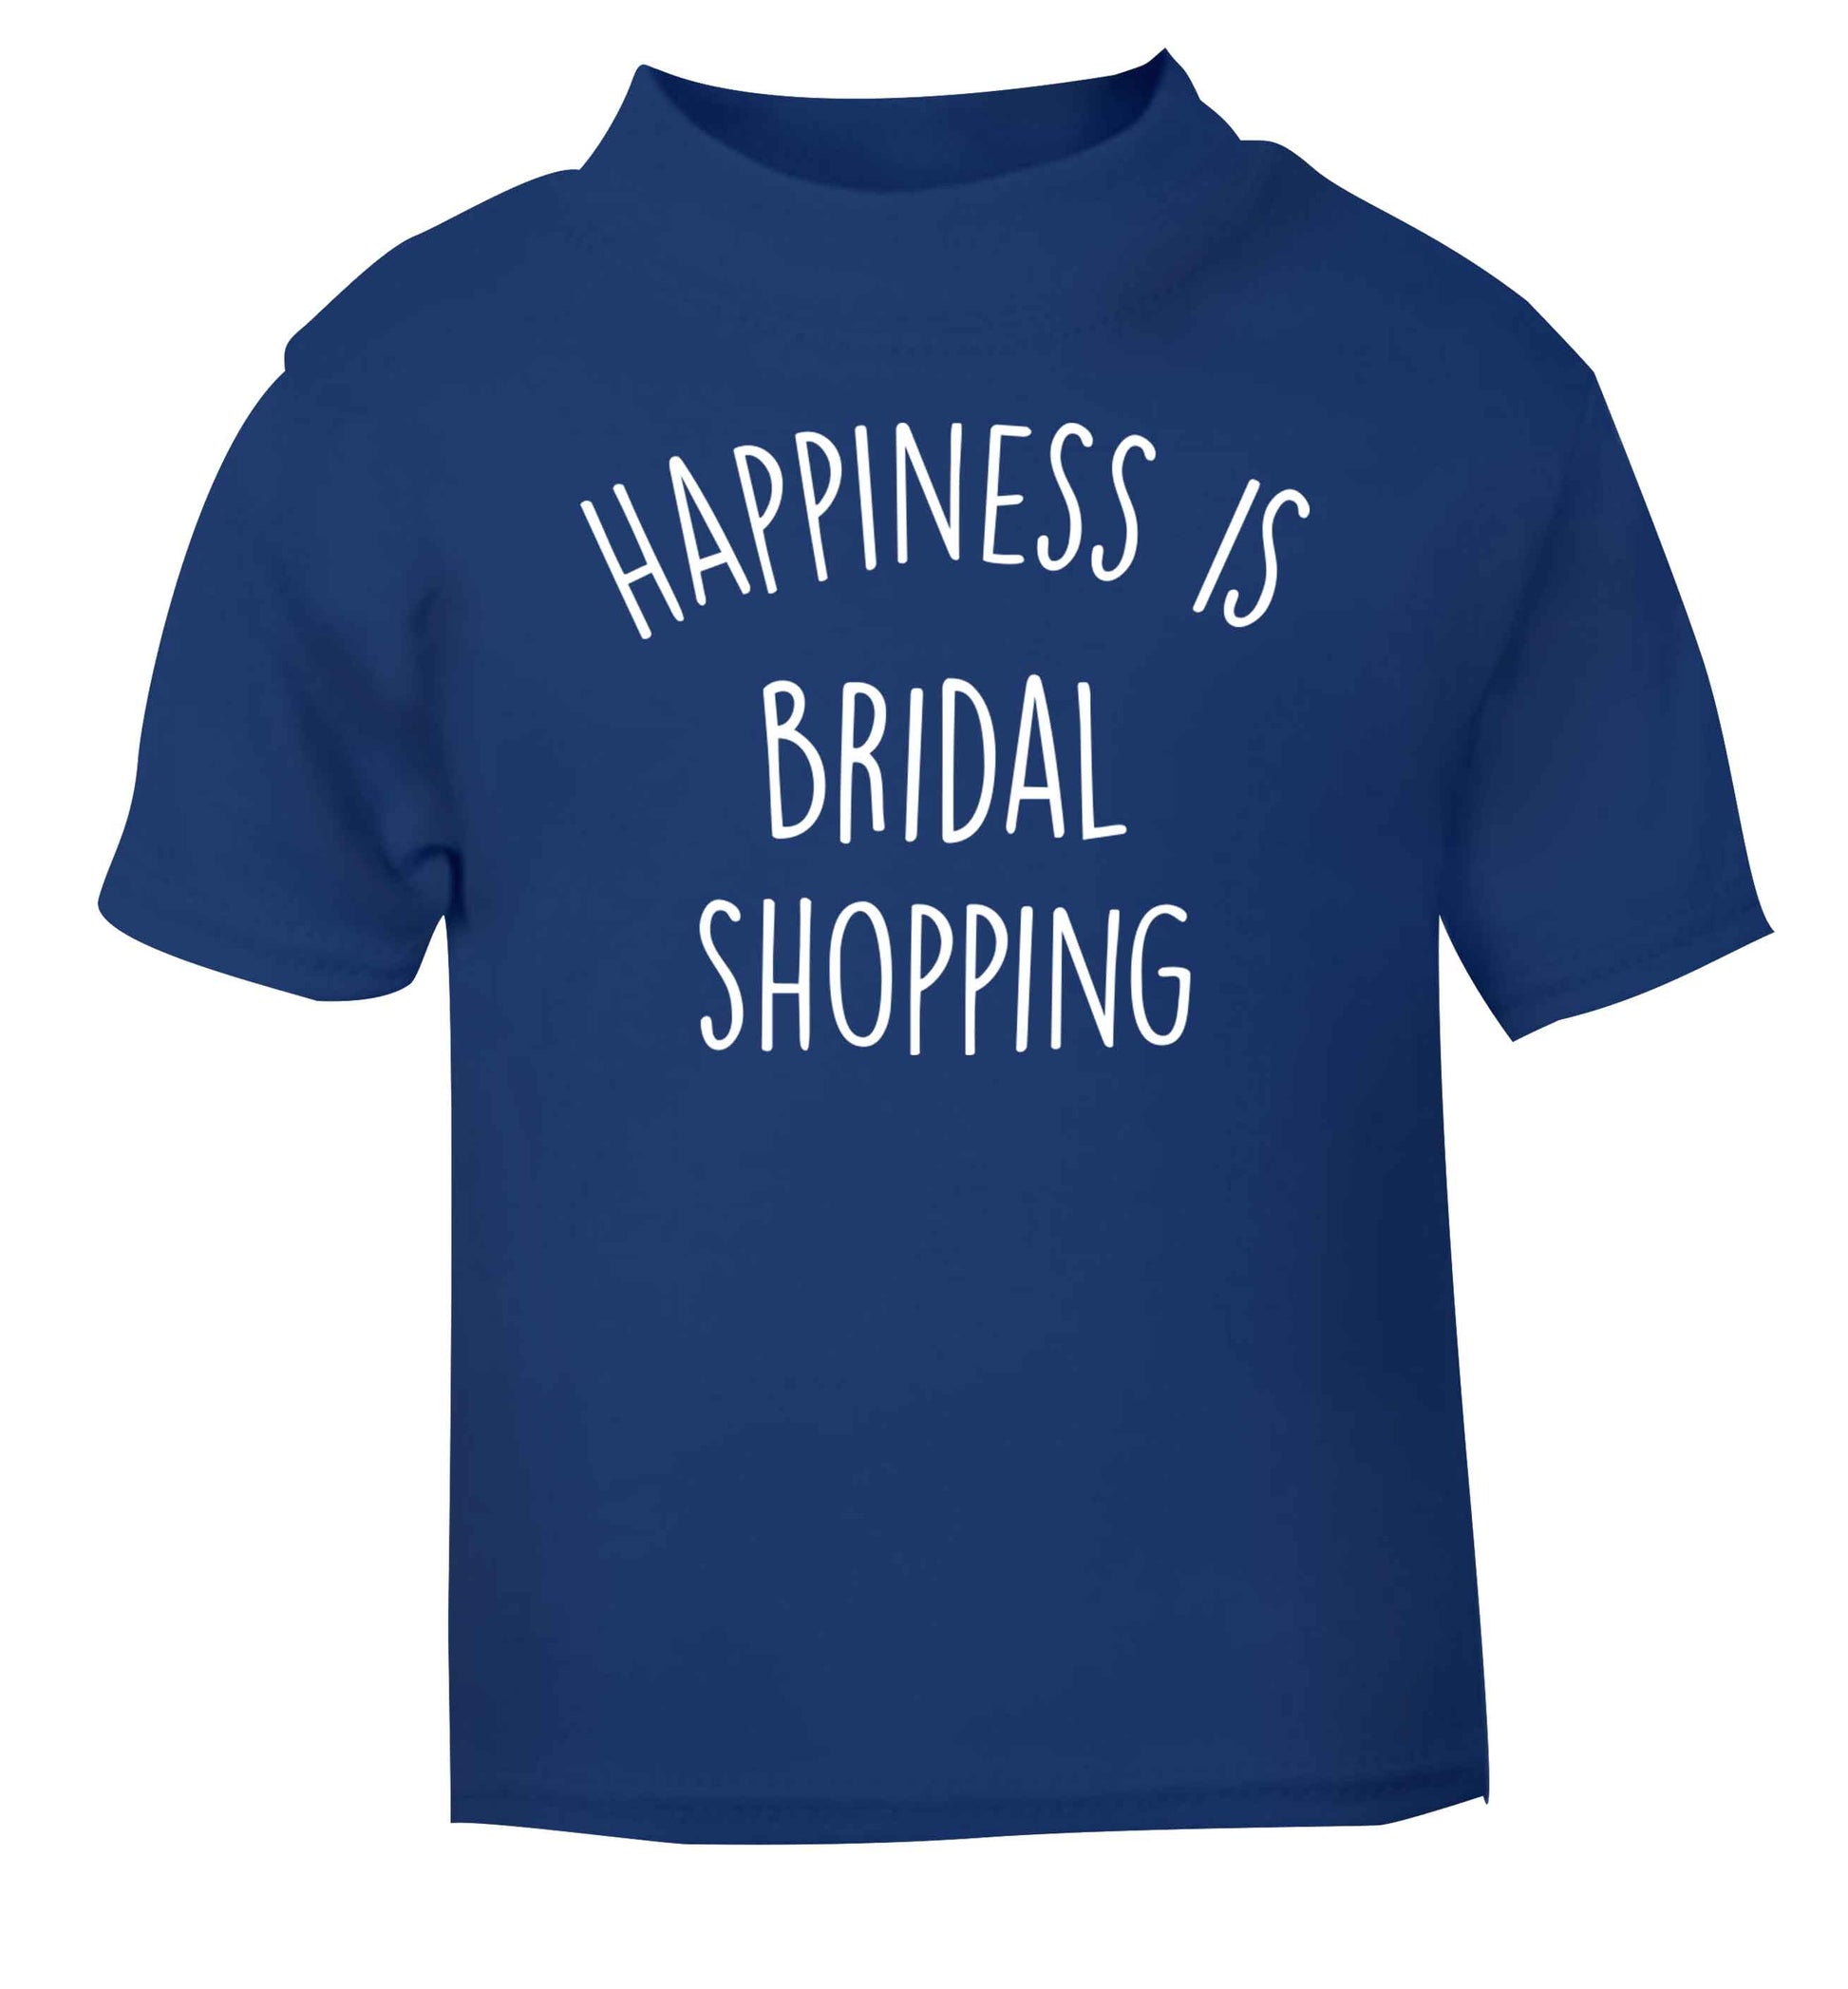 Happiness is bridal shopping blue baby toddler Tshirt 2 Years